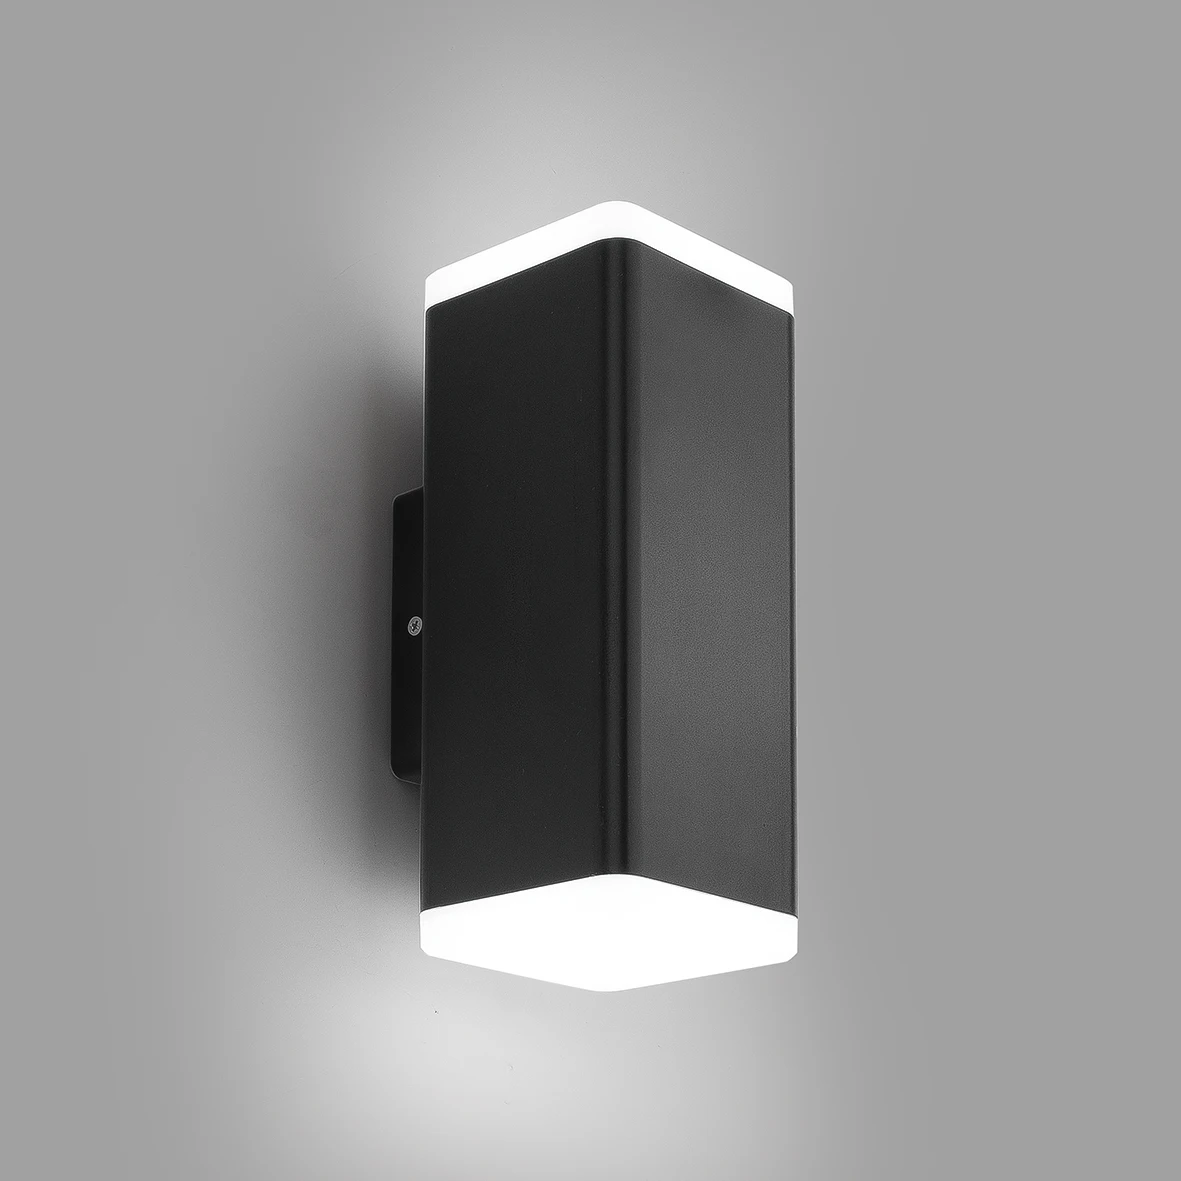 PS2003-LED plastic material outdoor lighting wall sconce solar powered outdoor light up and down